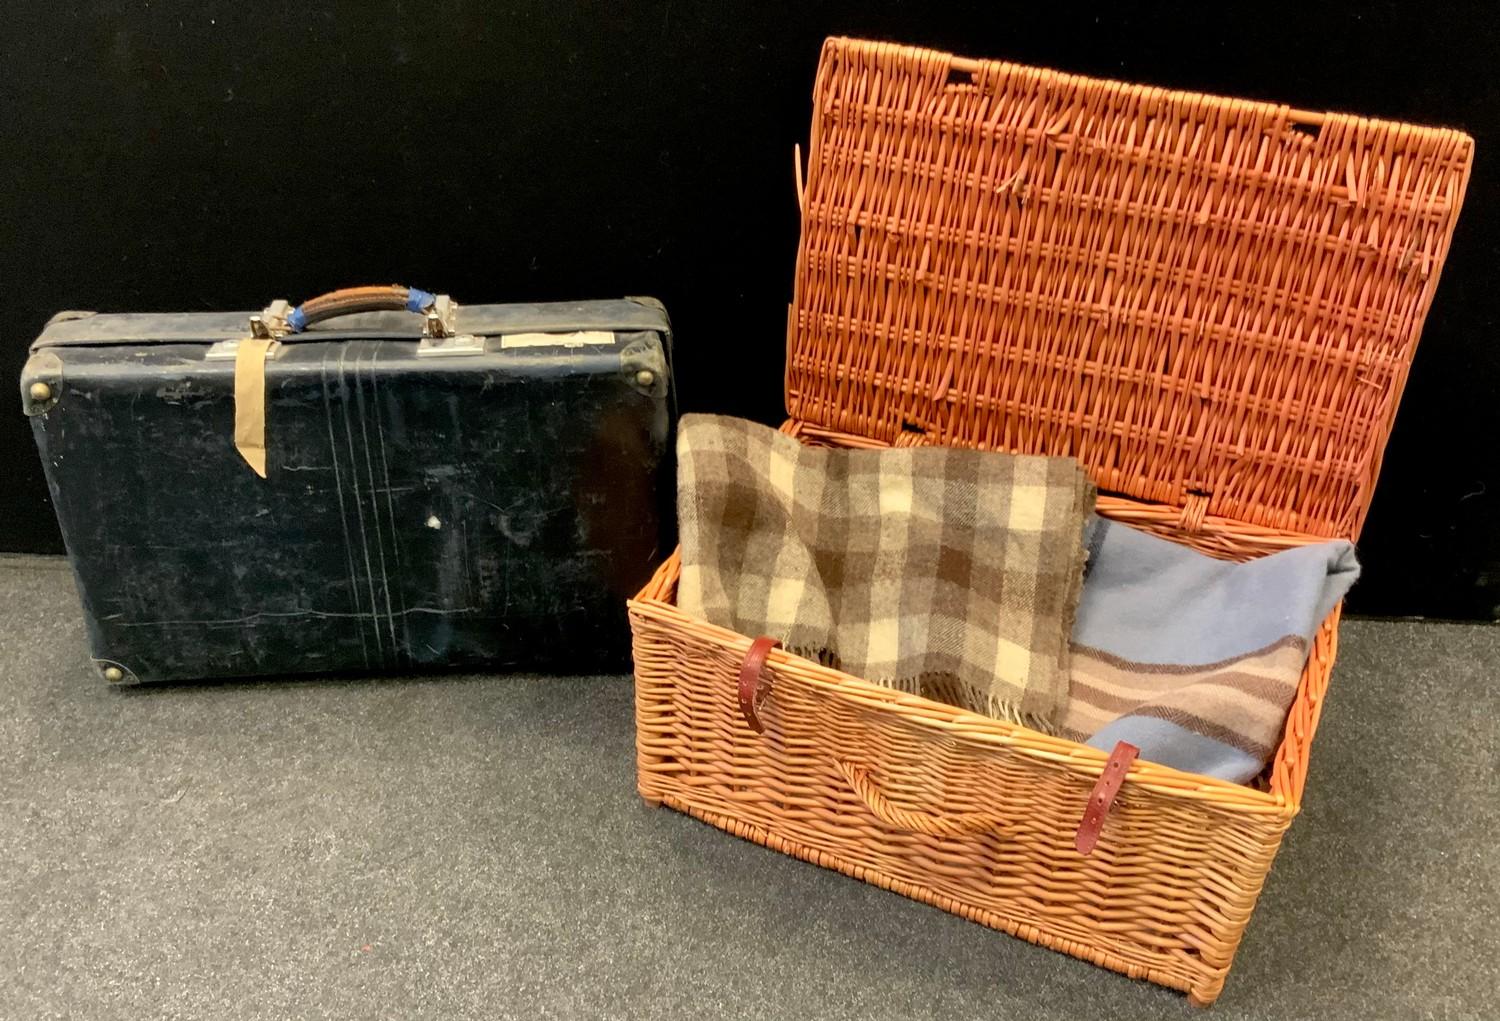 A larger wicker hamper containing blankets; a vintage suitcase etc.